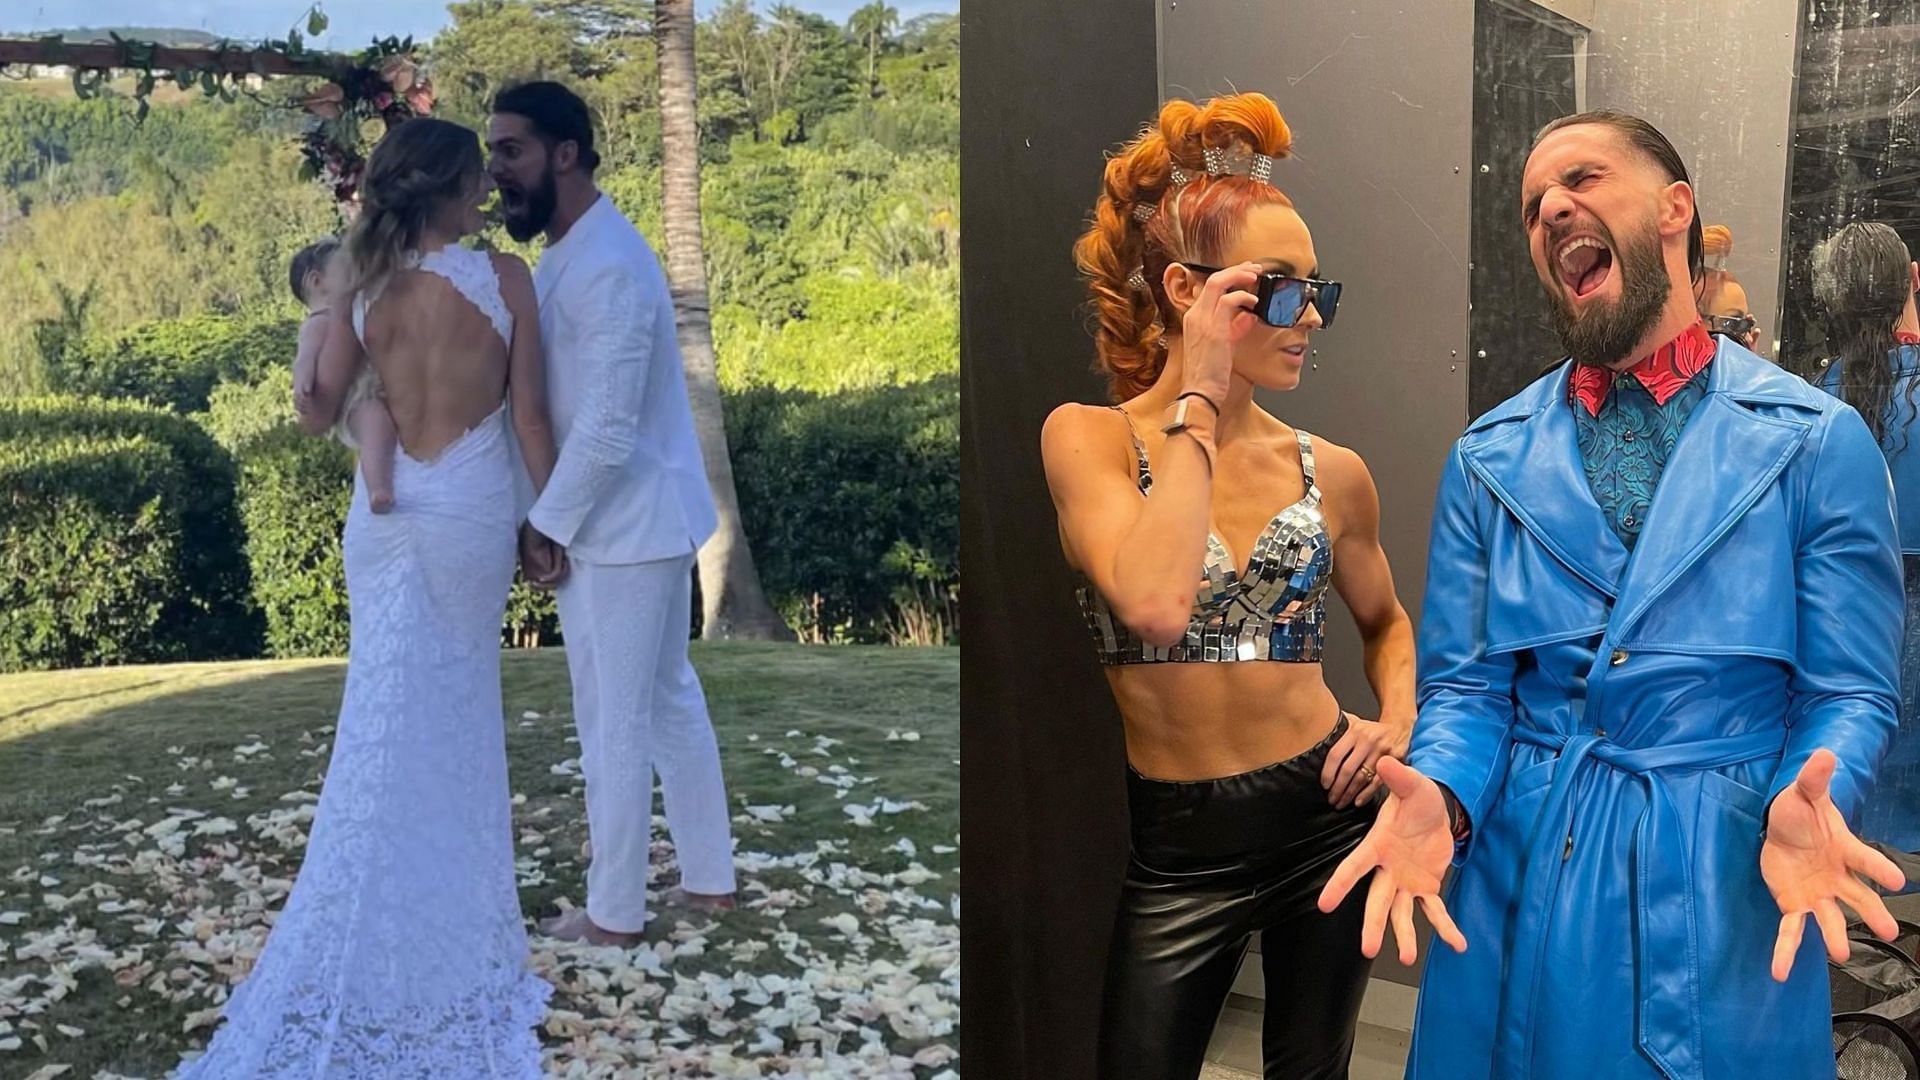 Seth Rollins and Becky Lynch started dating in 2019